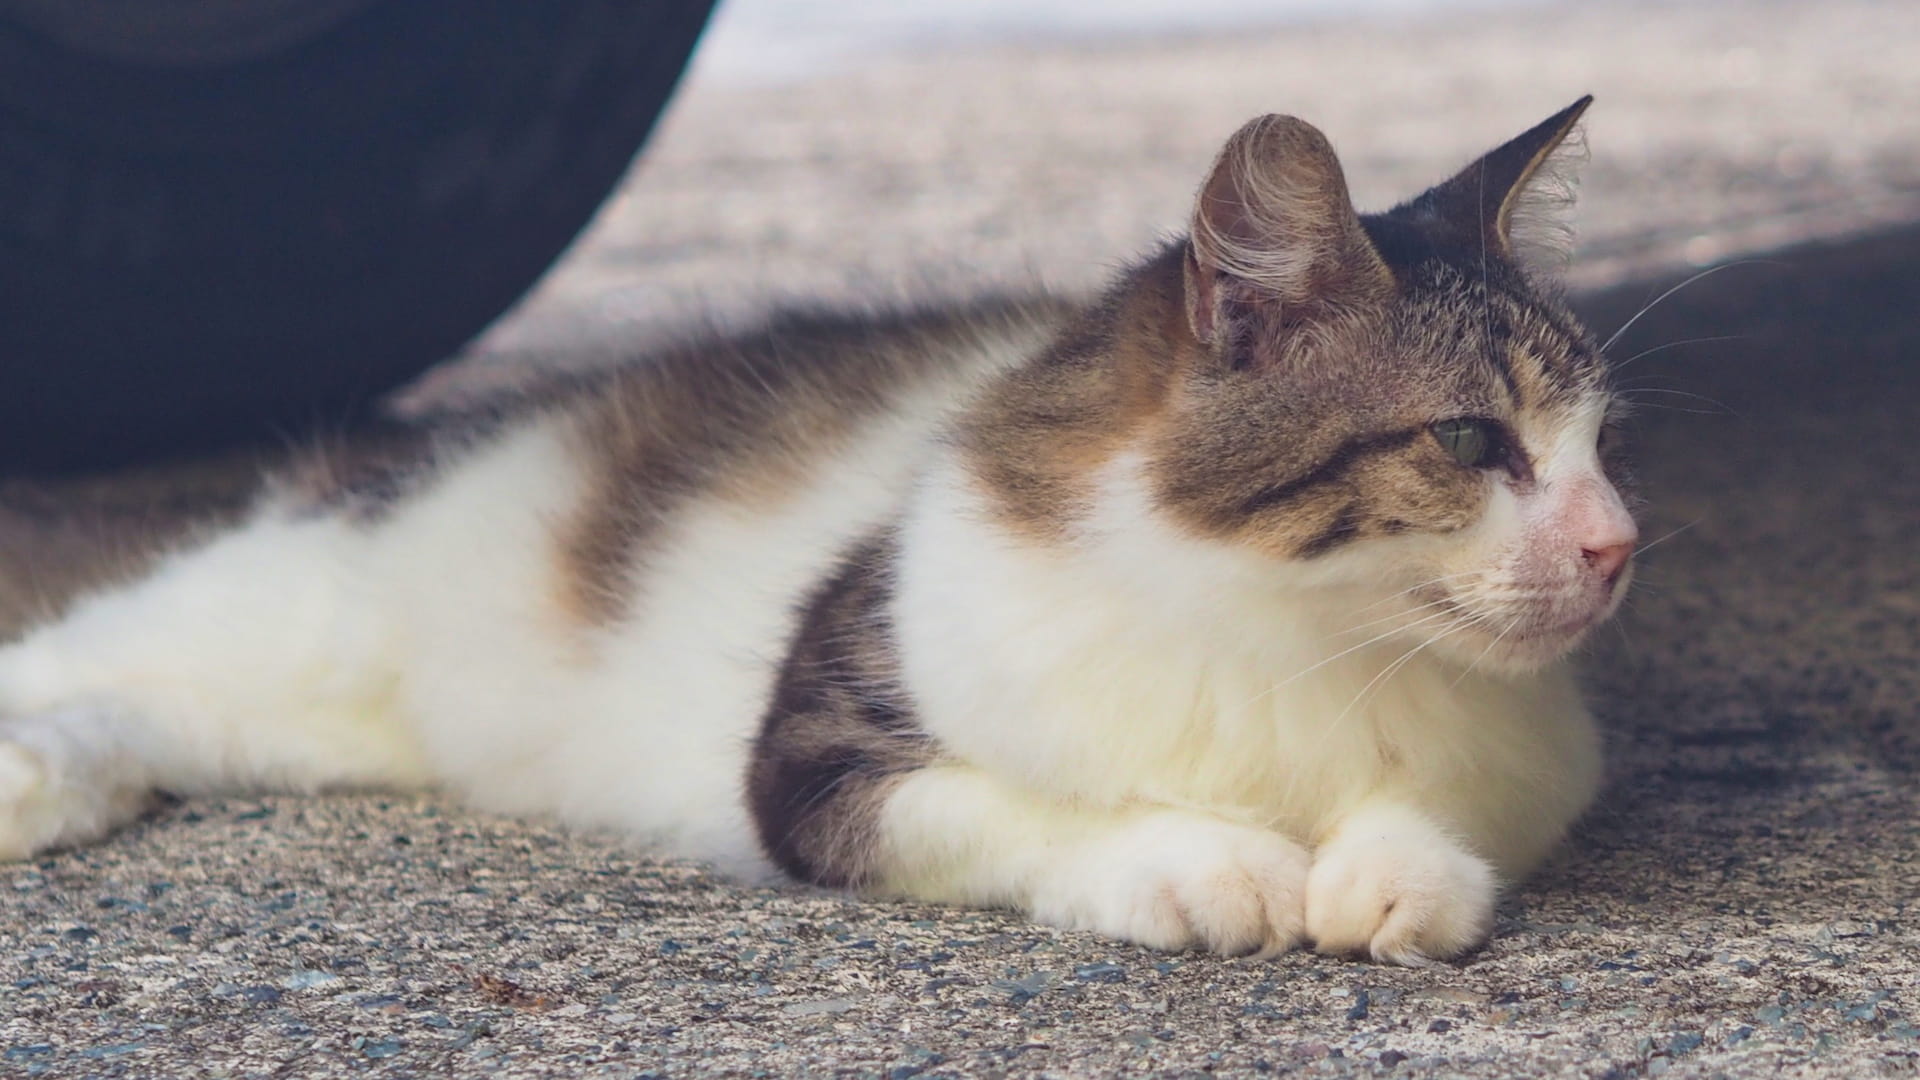 A cat lies underneath a car whilst staring over to the right